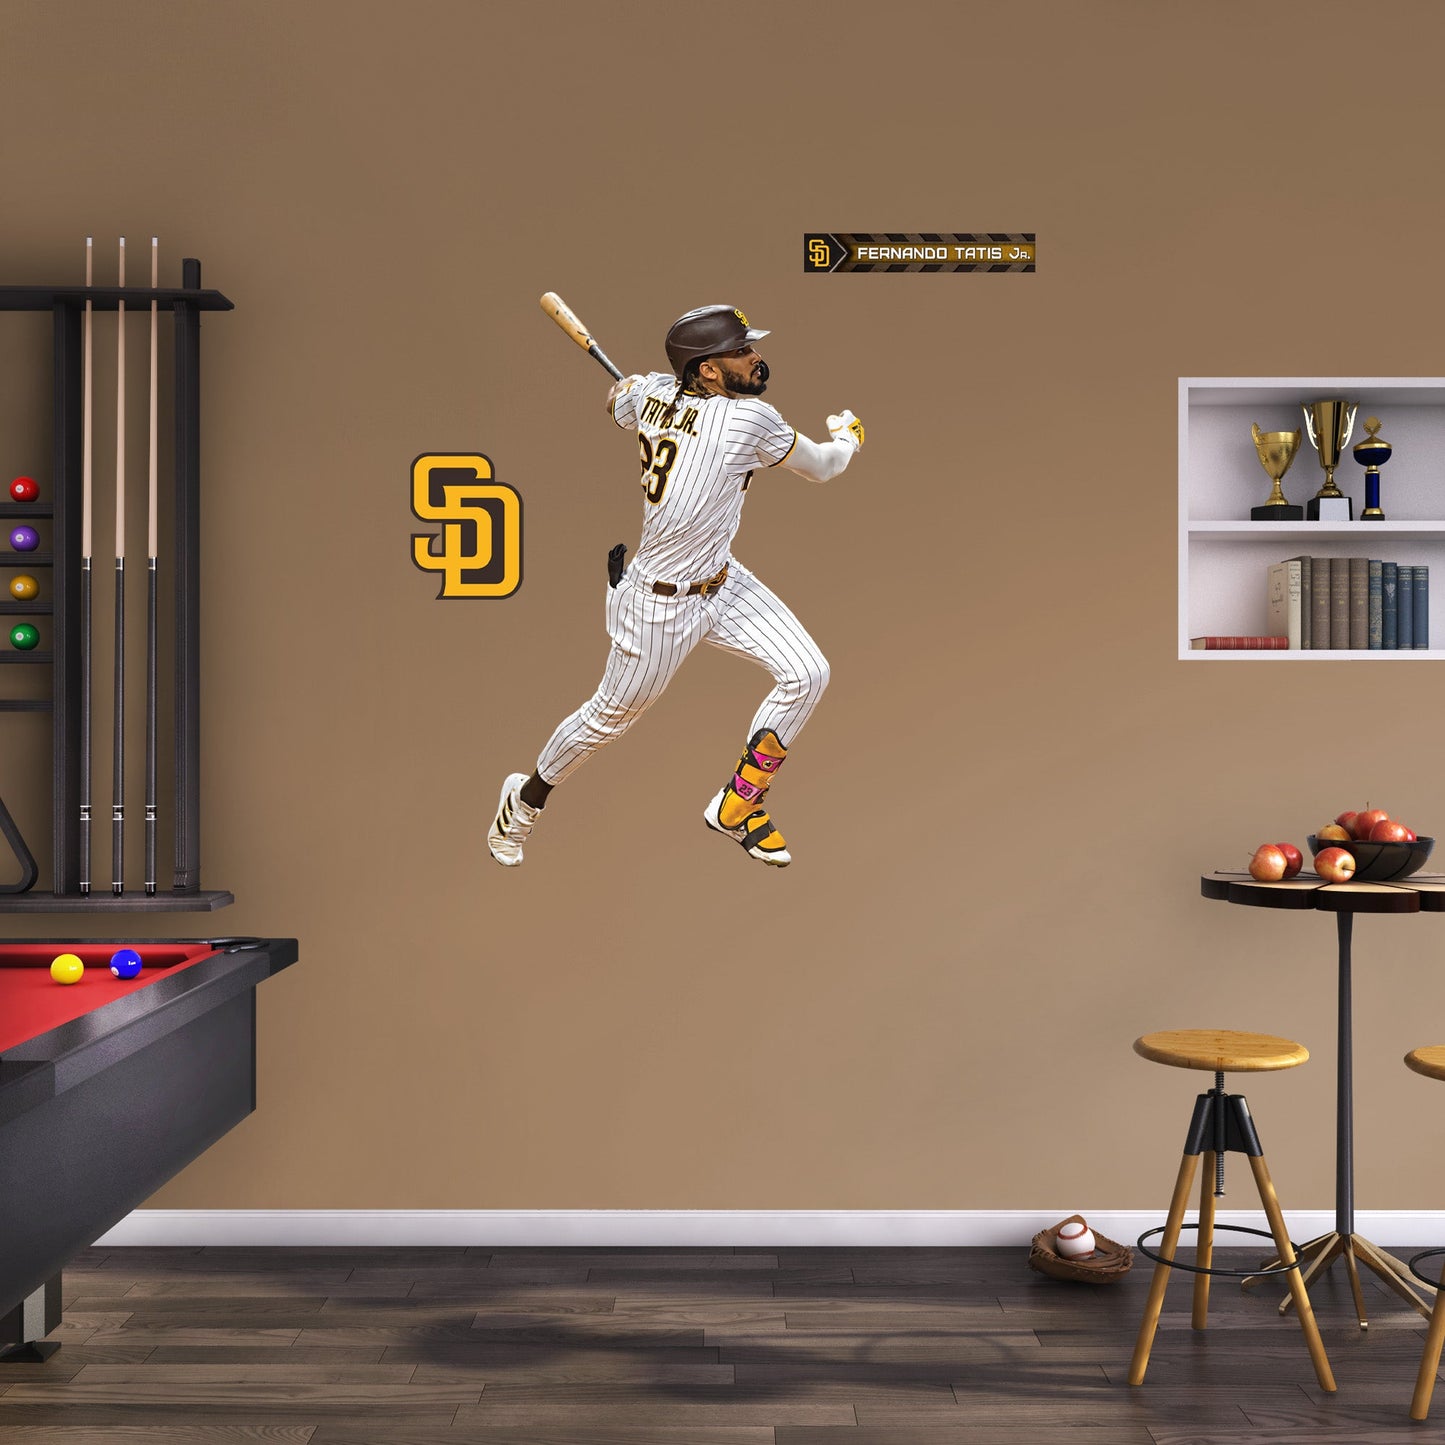 San Diego Padres: Fernando Tatís Jr.         - Officially Licensed MLB Removable     Adhesive Decal